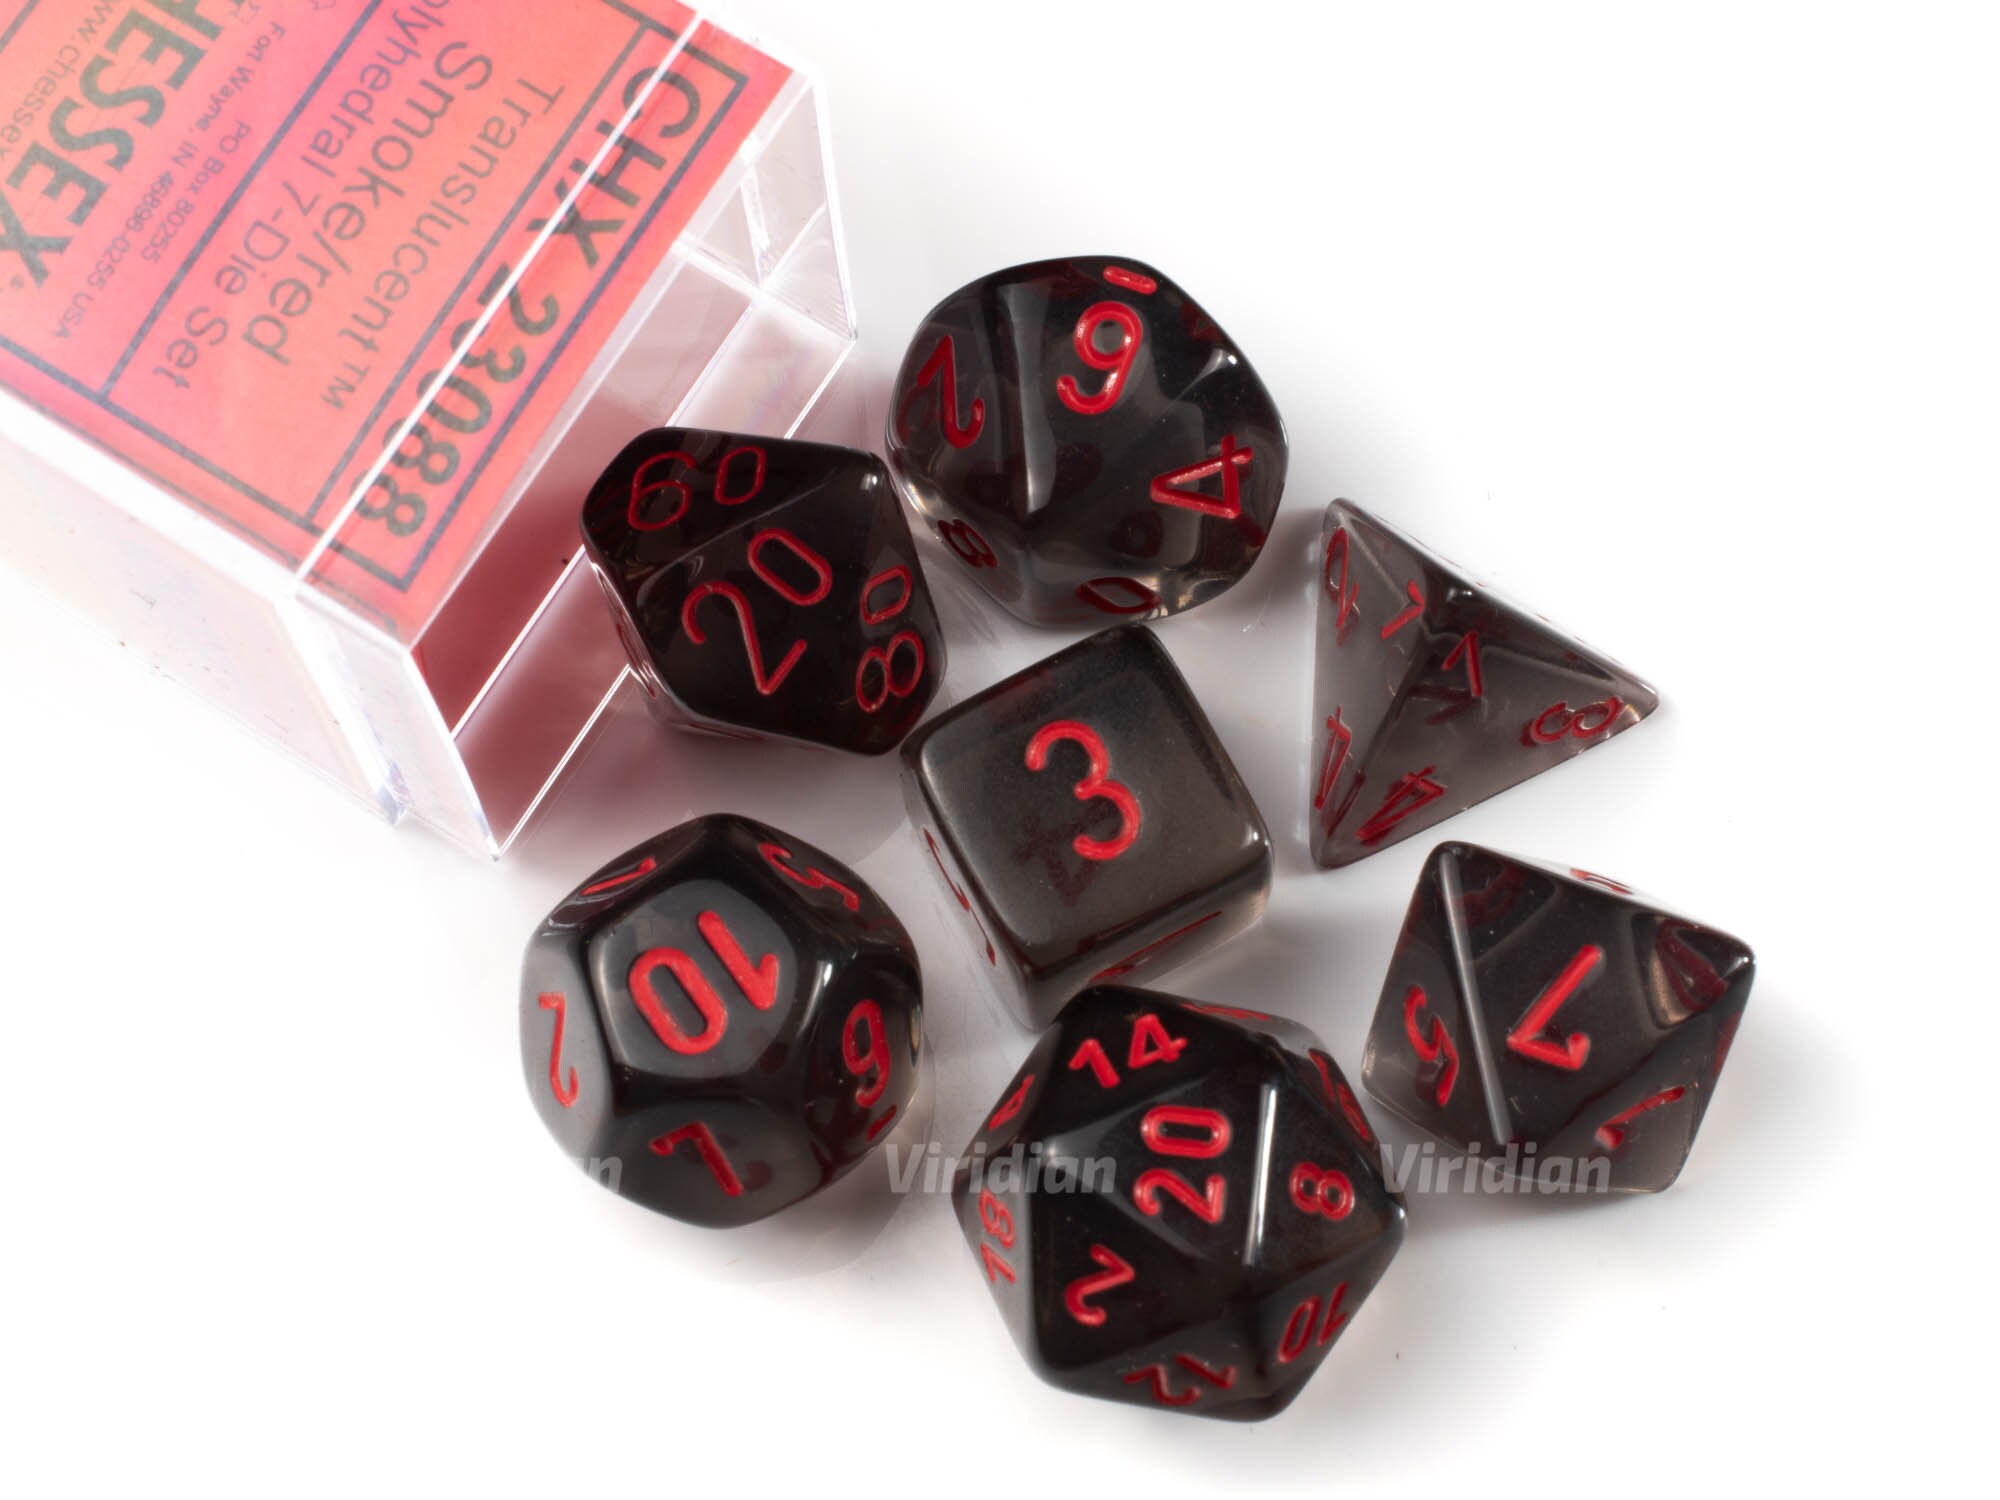 CHESSEX TRANSLUCENT DICE 7 DIE SET SMOKE WITH RED D20..